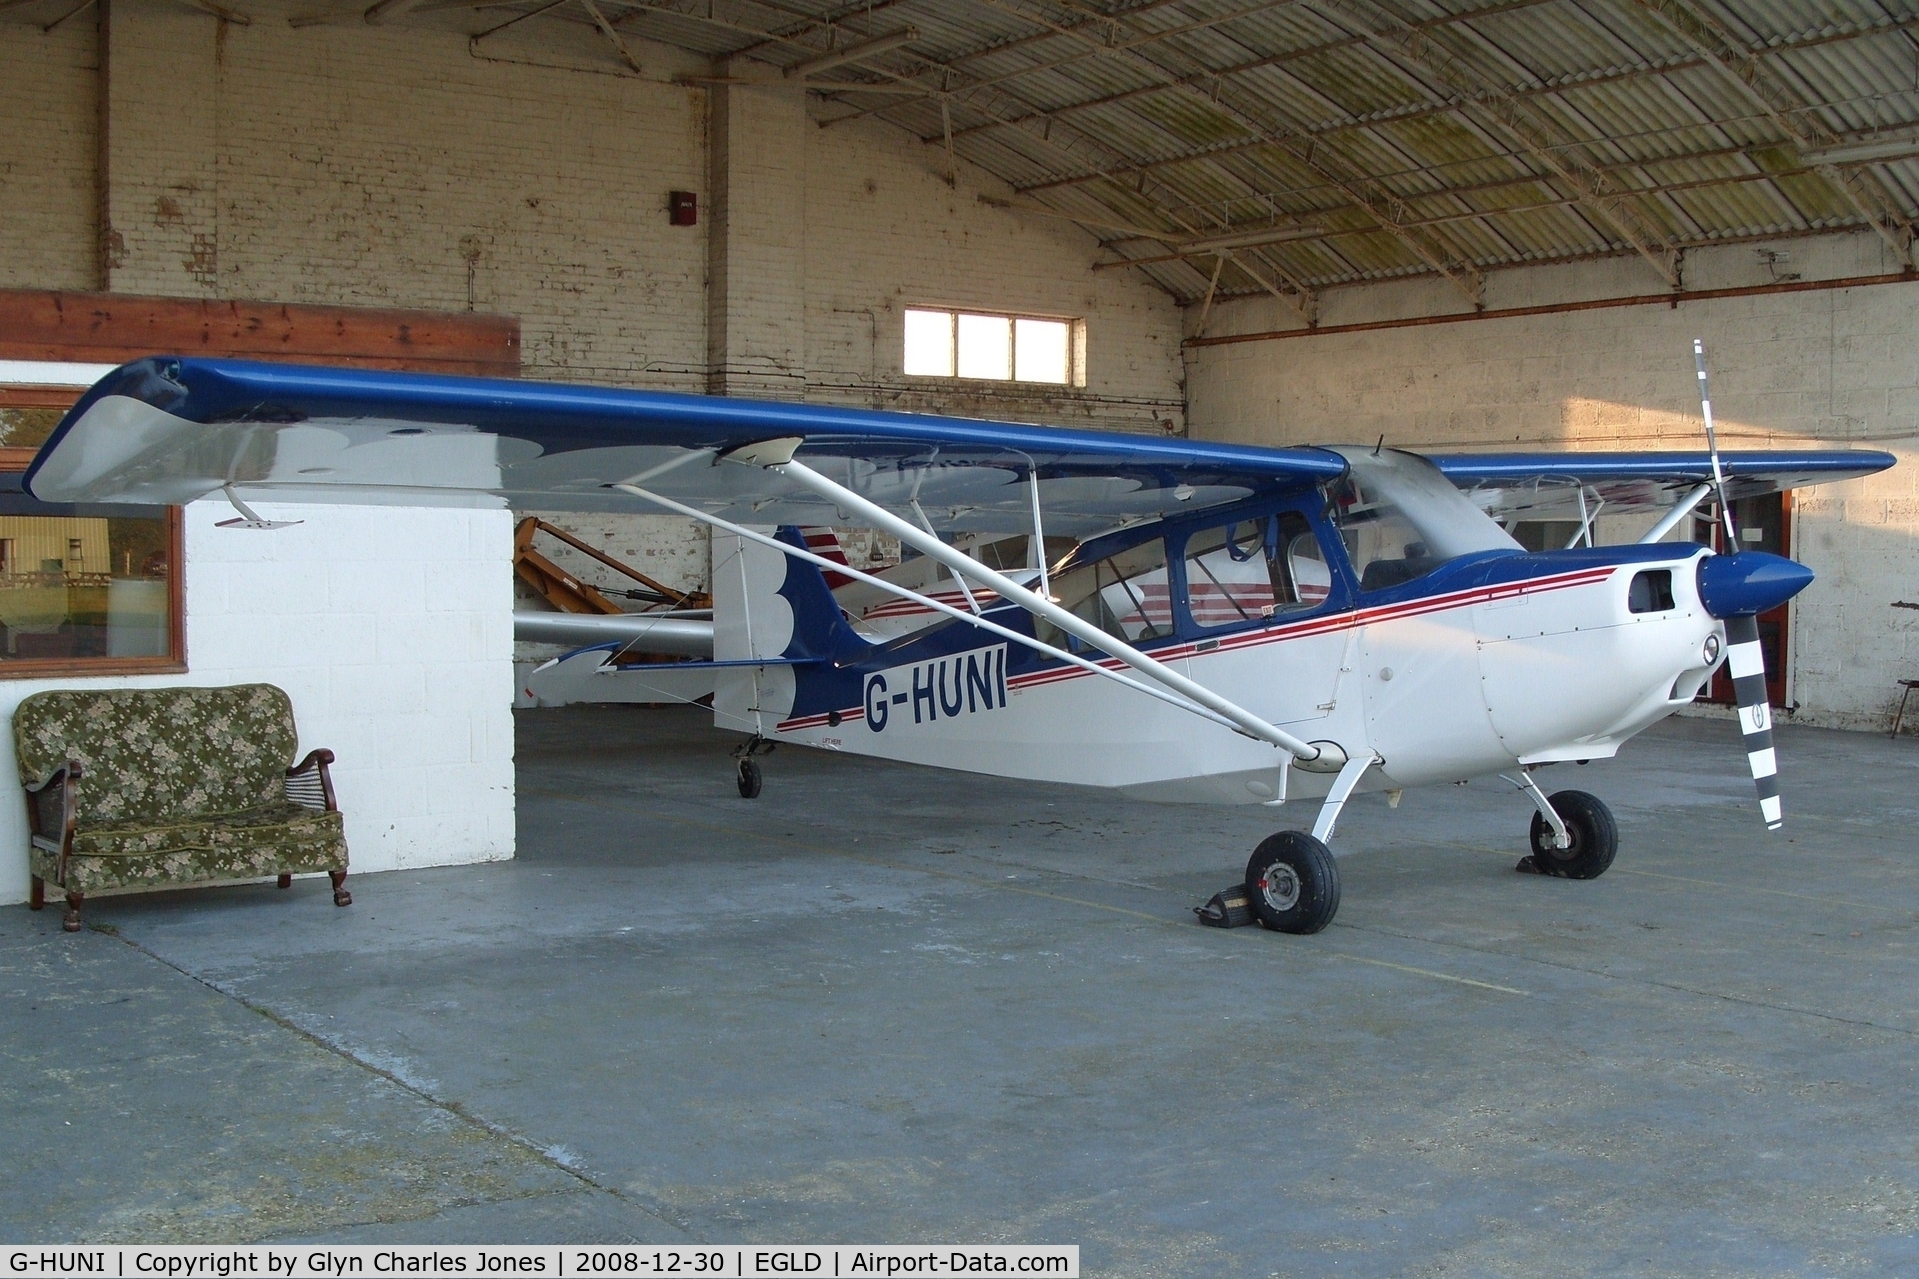 G-HUNI, 1973 Bellanca 7GCBC Citabria C/N 541-73, Residing in The Pilot Centre hangar it shares with Piper PA-30-160 Twin Comanche B G-AZAB. Previously OO-IME and D-EIME. With thanks to The Pilot Centre who are the Citabria's owners.